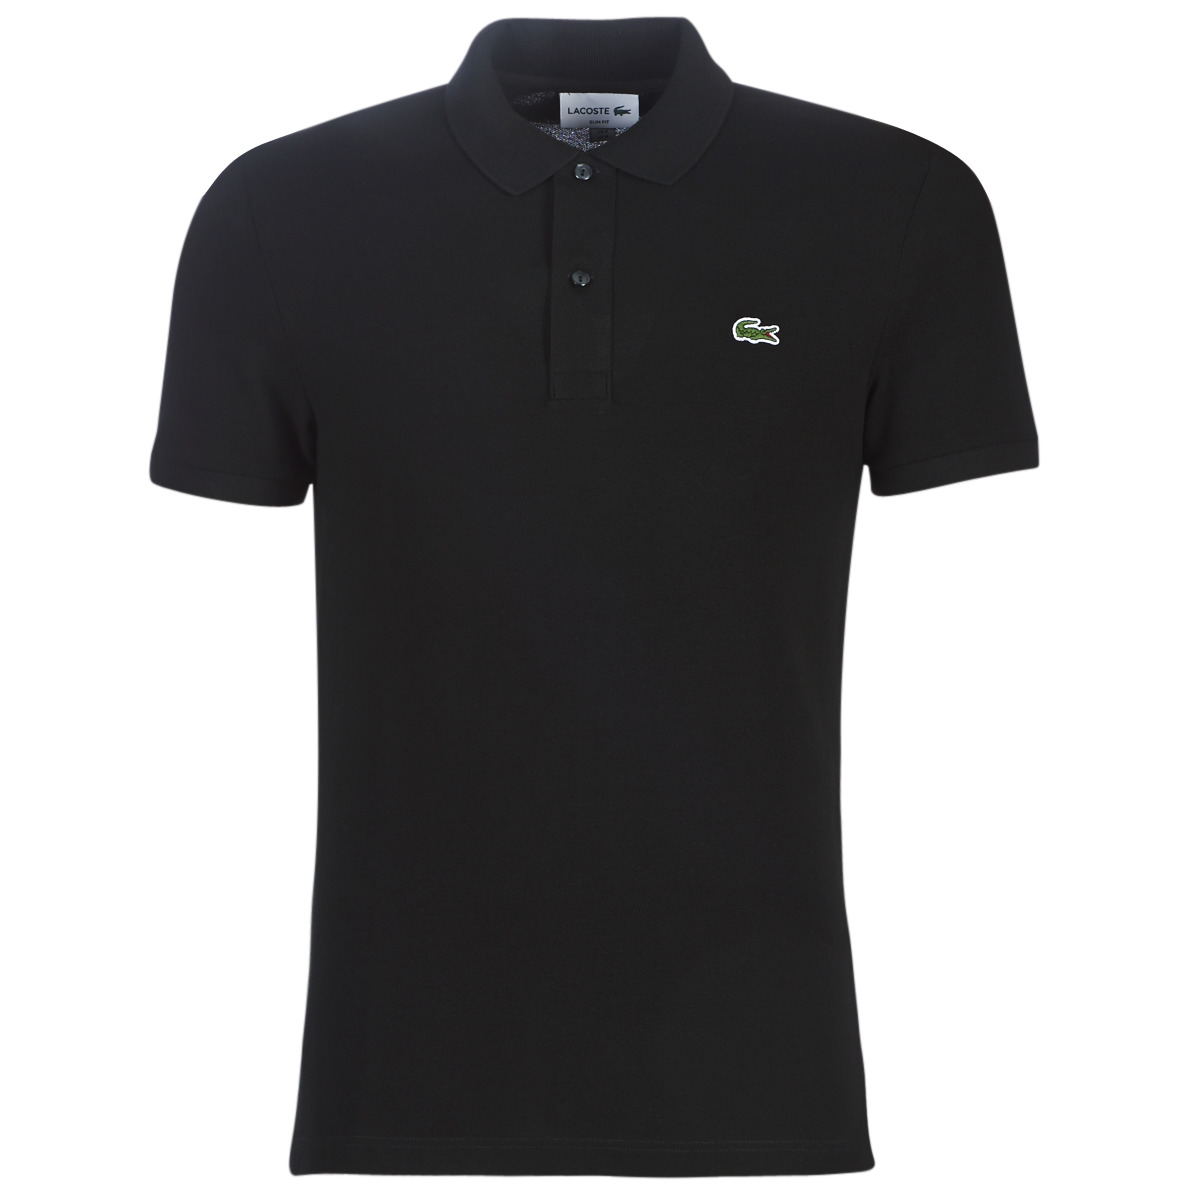 Lacoste Polo Shirt Black Slim Fit | vlr.eng.br